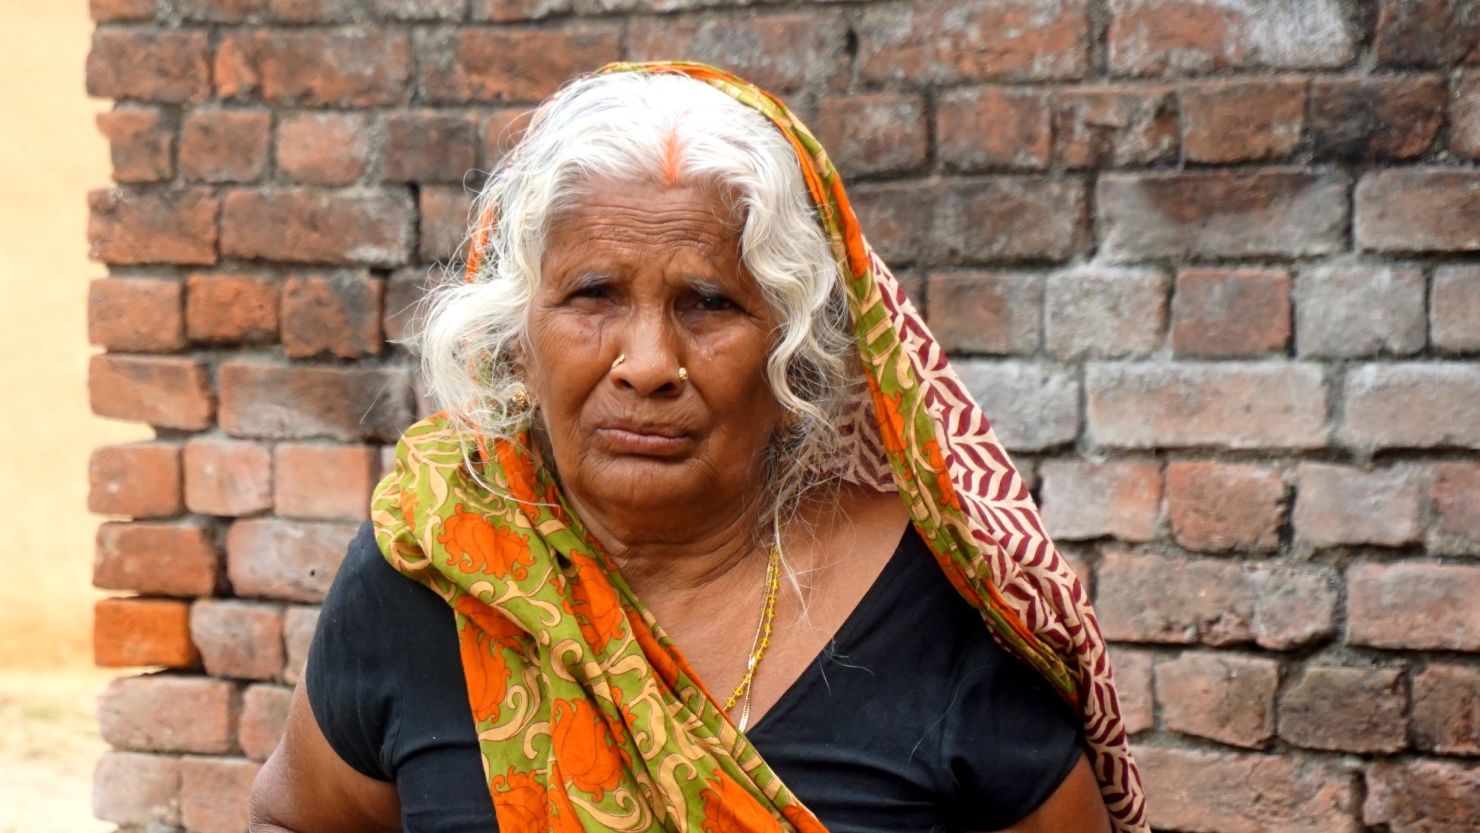 Laxmi Devi, the mother of a suspected Maoist, said anti-rebel forces often raid her house.